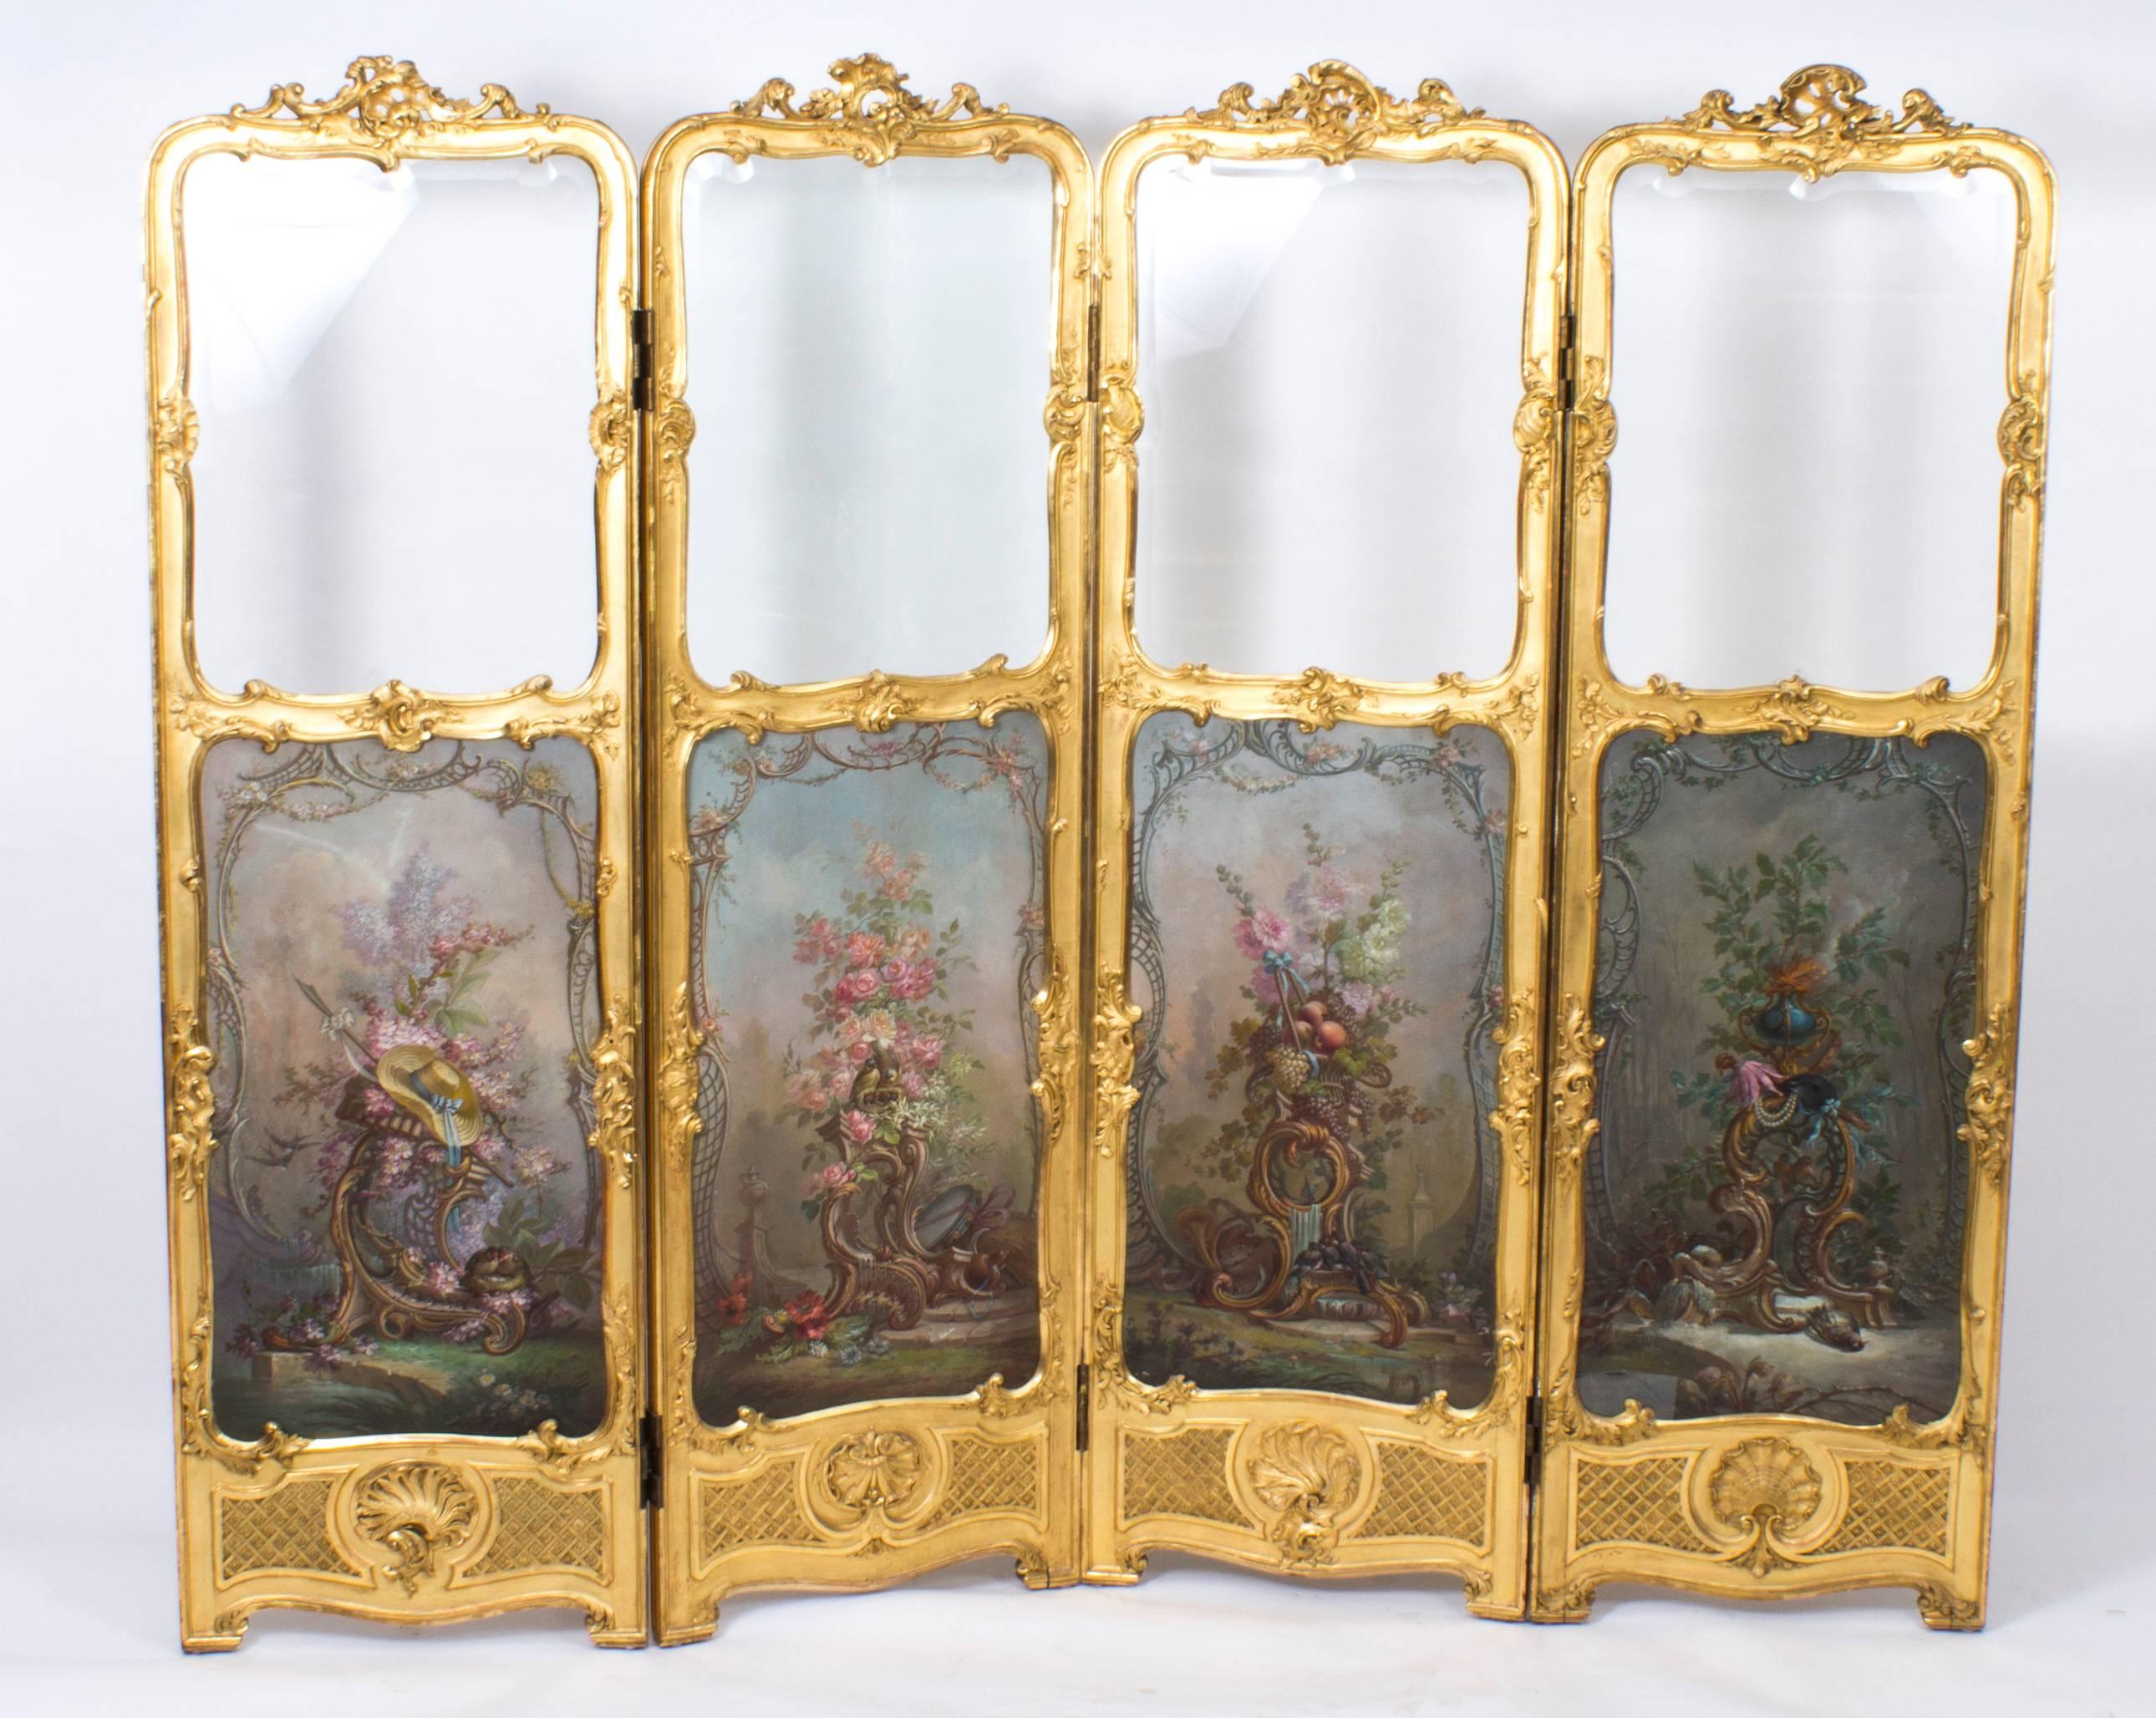 A Louis Revival giltwood four fold screen with painted Vernis Martin panels, circa 1880 in date.

The four fold hinged screen features decorative carved shaped scrolled tops with decorated acanthus and shell mounts. The panels have shaped bevelled